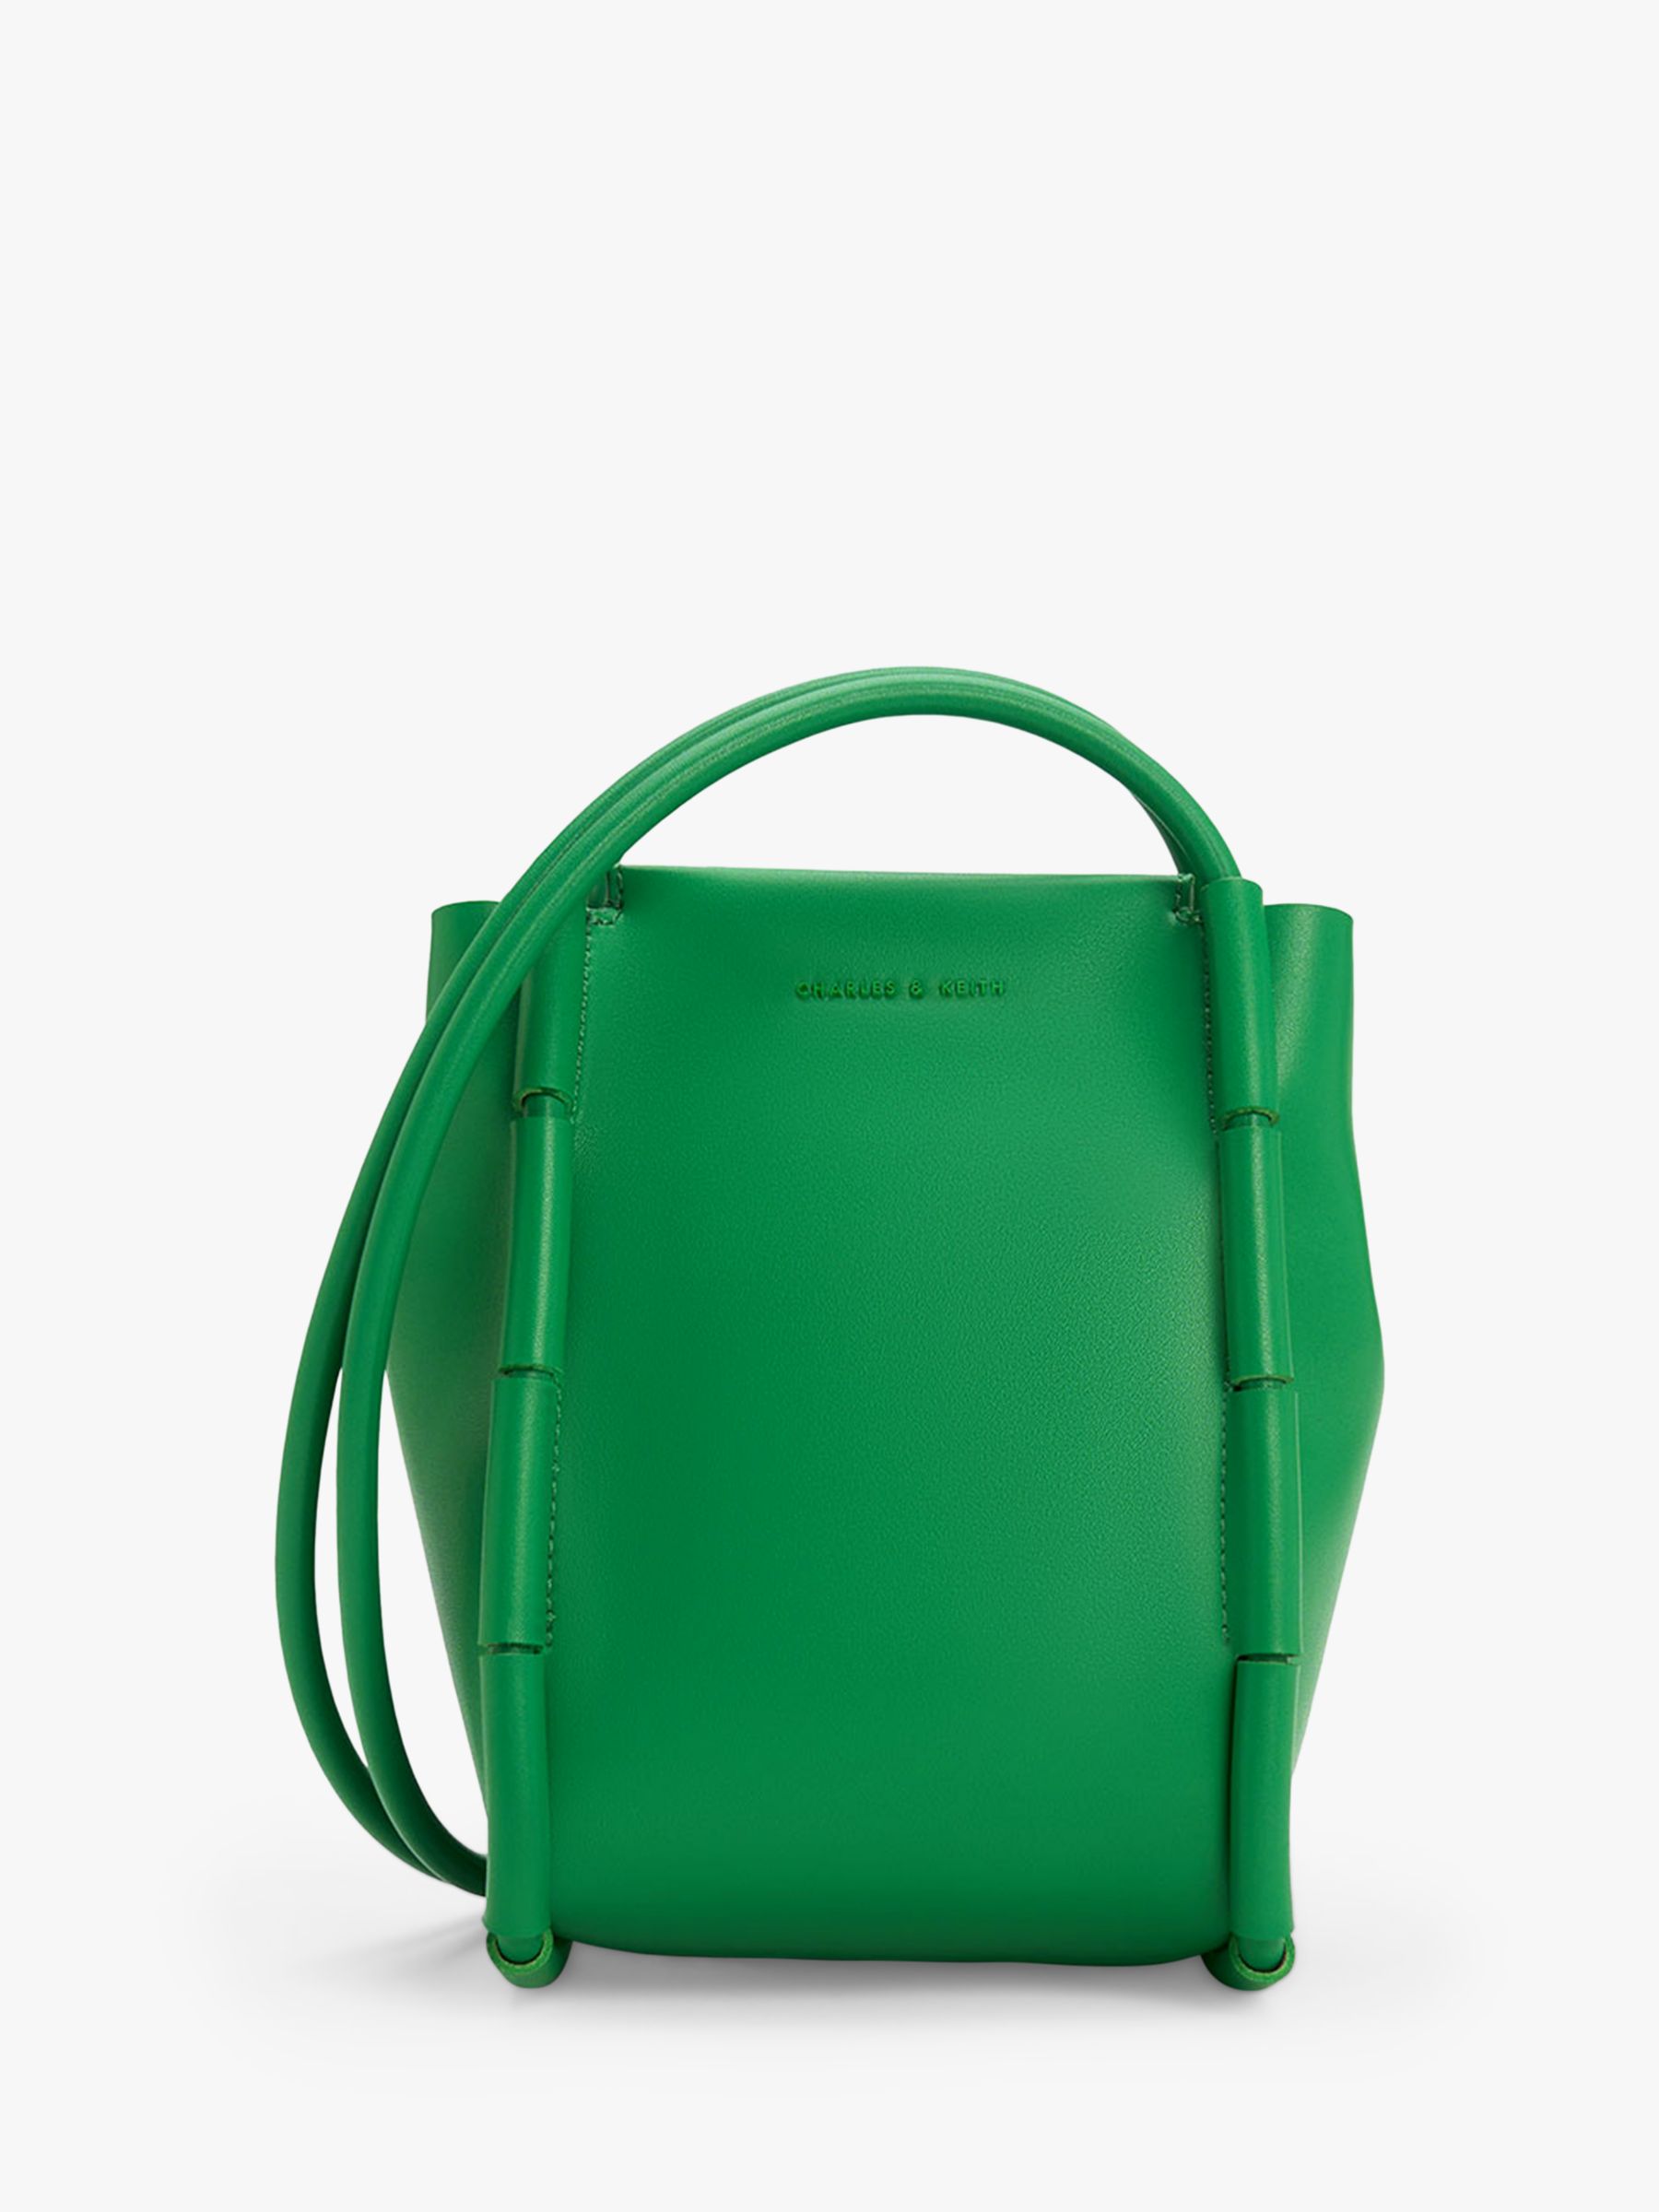 CHARLES & KEITH Machina Faux Leather Shoulder Bag, Green